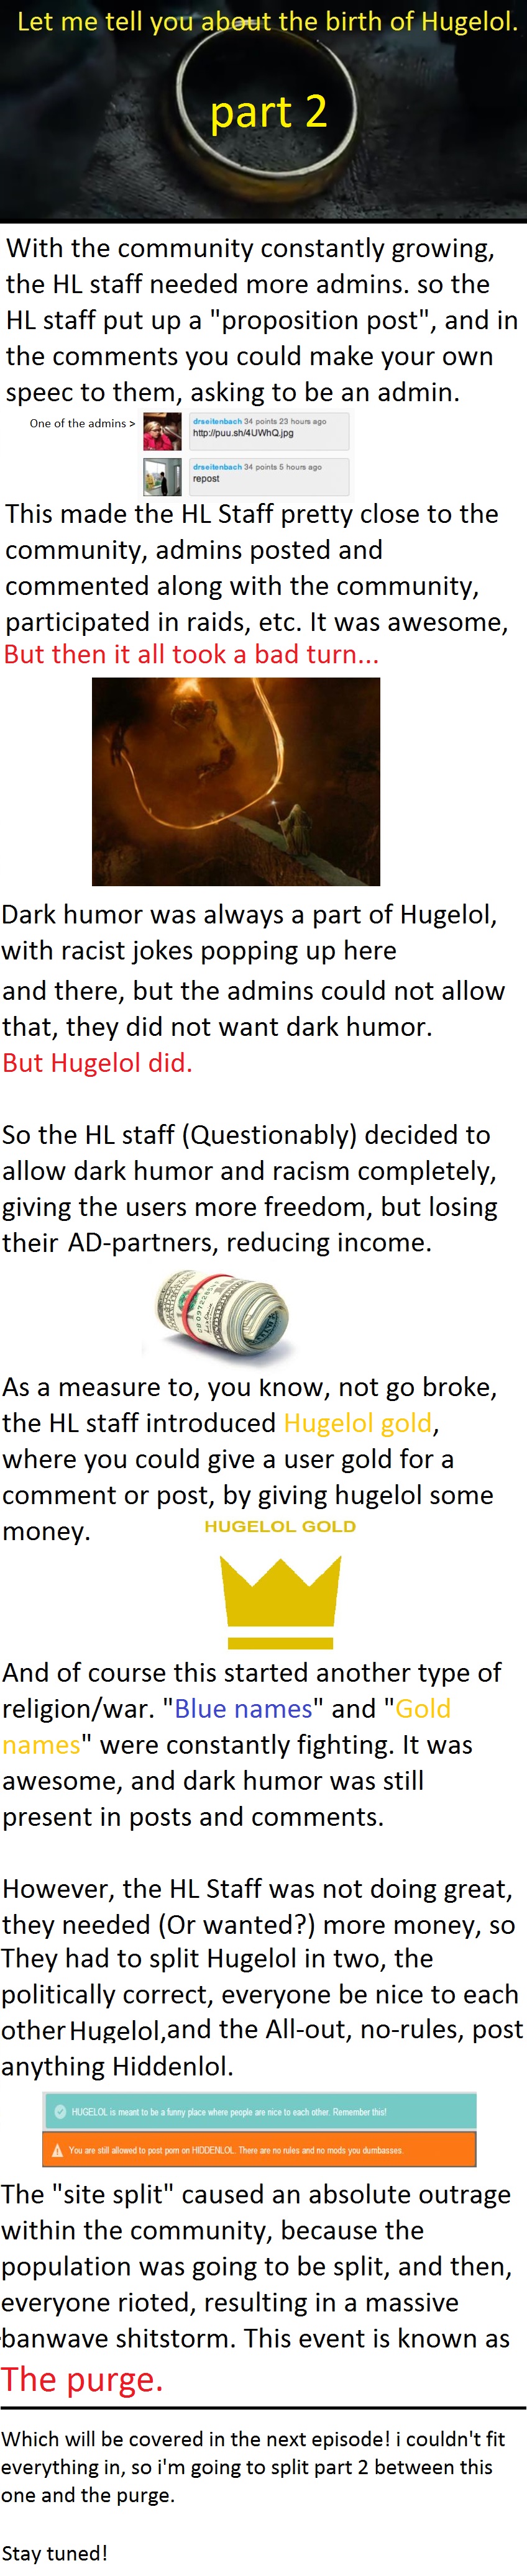 The birth of HL part 2 (1/2): Dark humor and money.